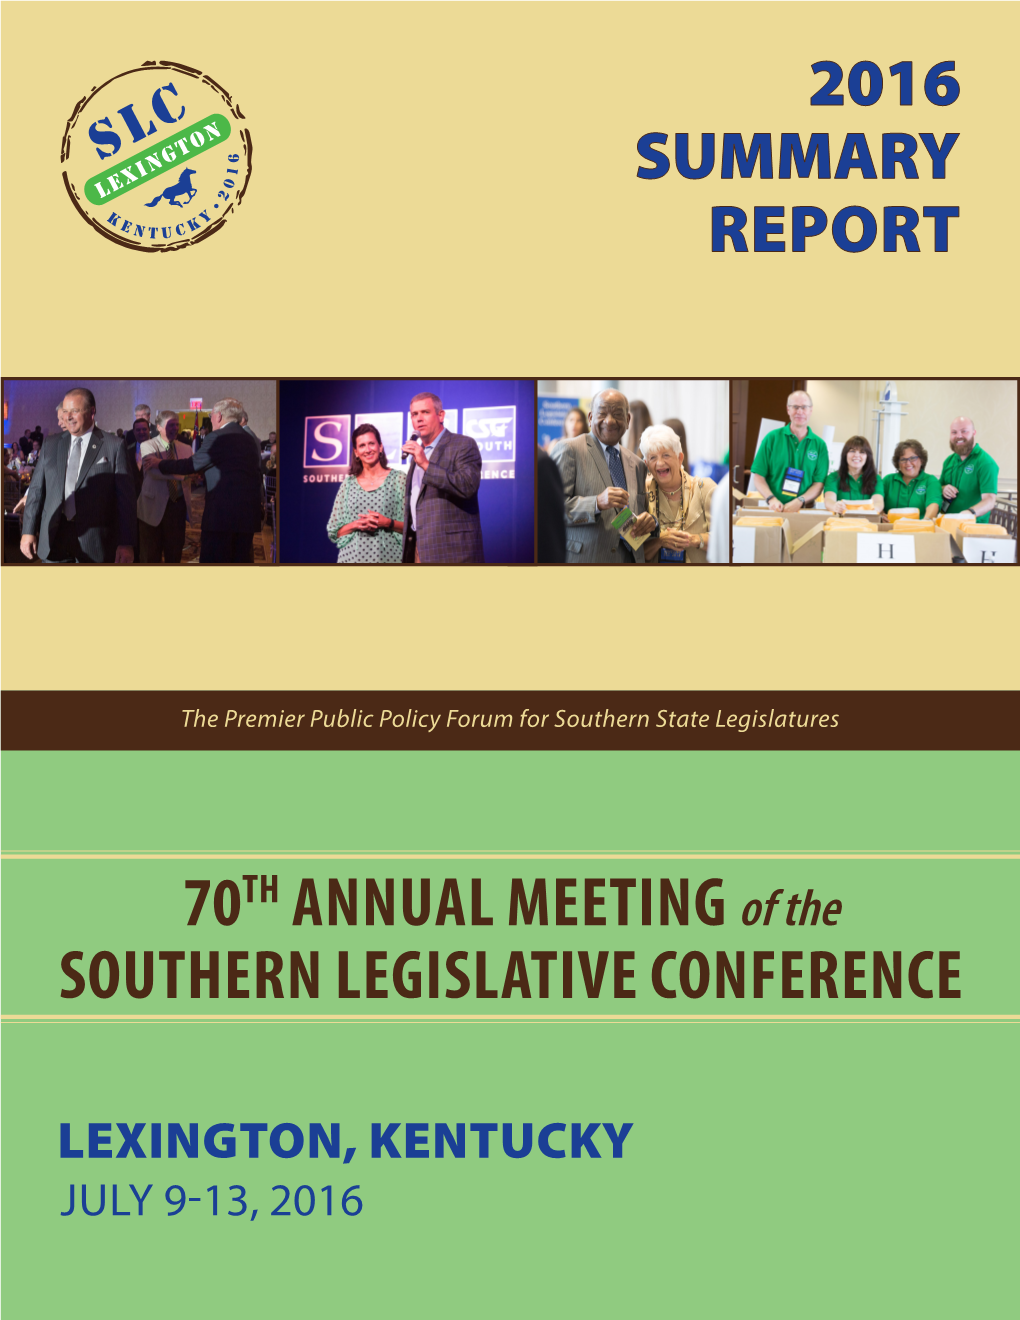 Annual Meeting Summary Report